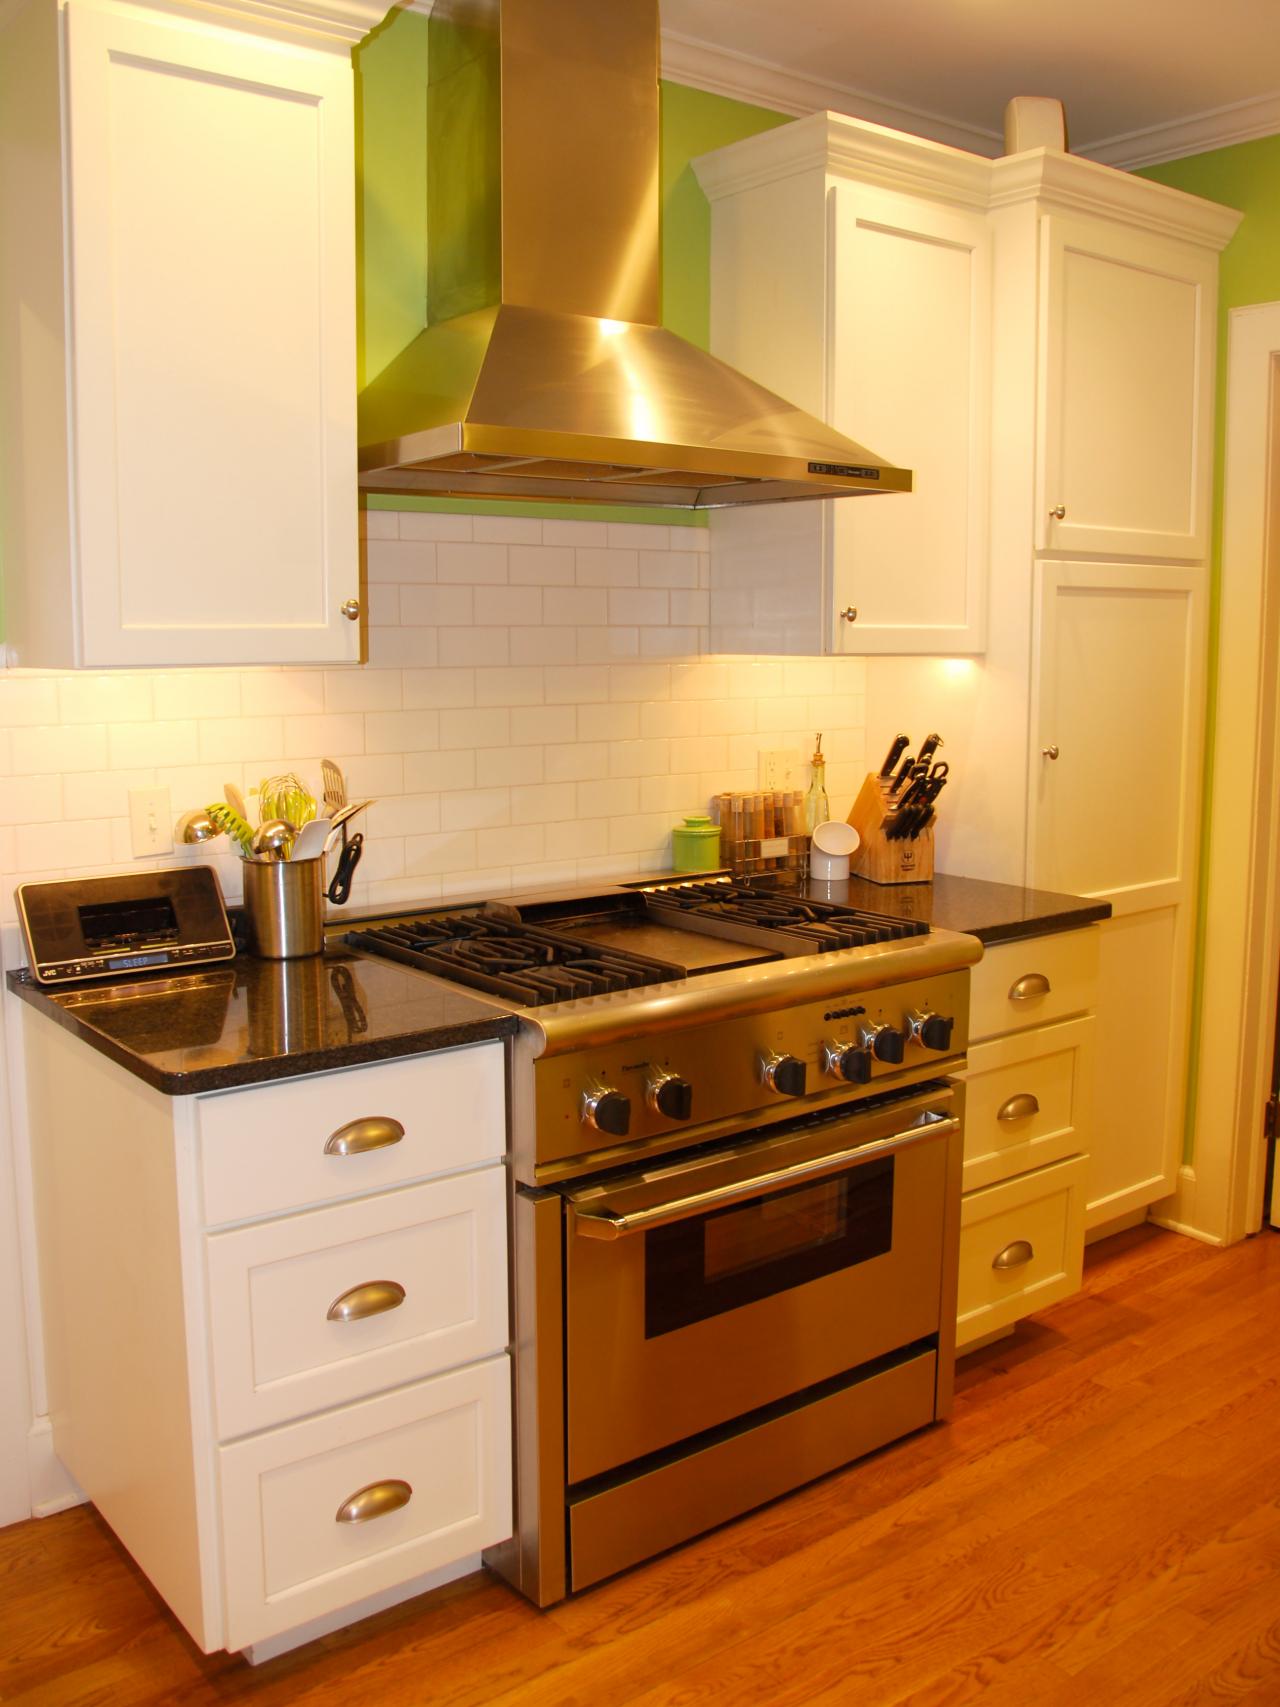 RMS_FeltSoCute-small-kitchen-makeover-20s-style_s3x4.jpg.rend.hgtvcom.1280.1707.jpeg